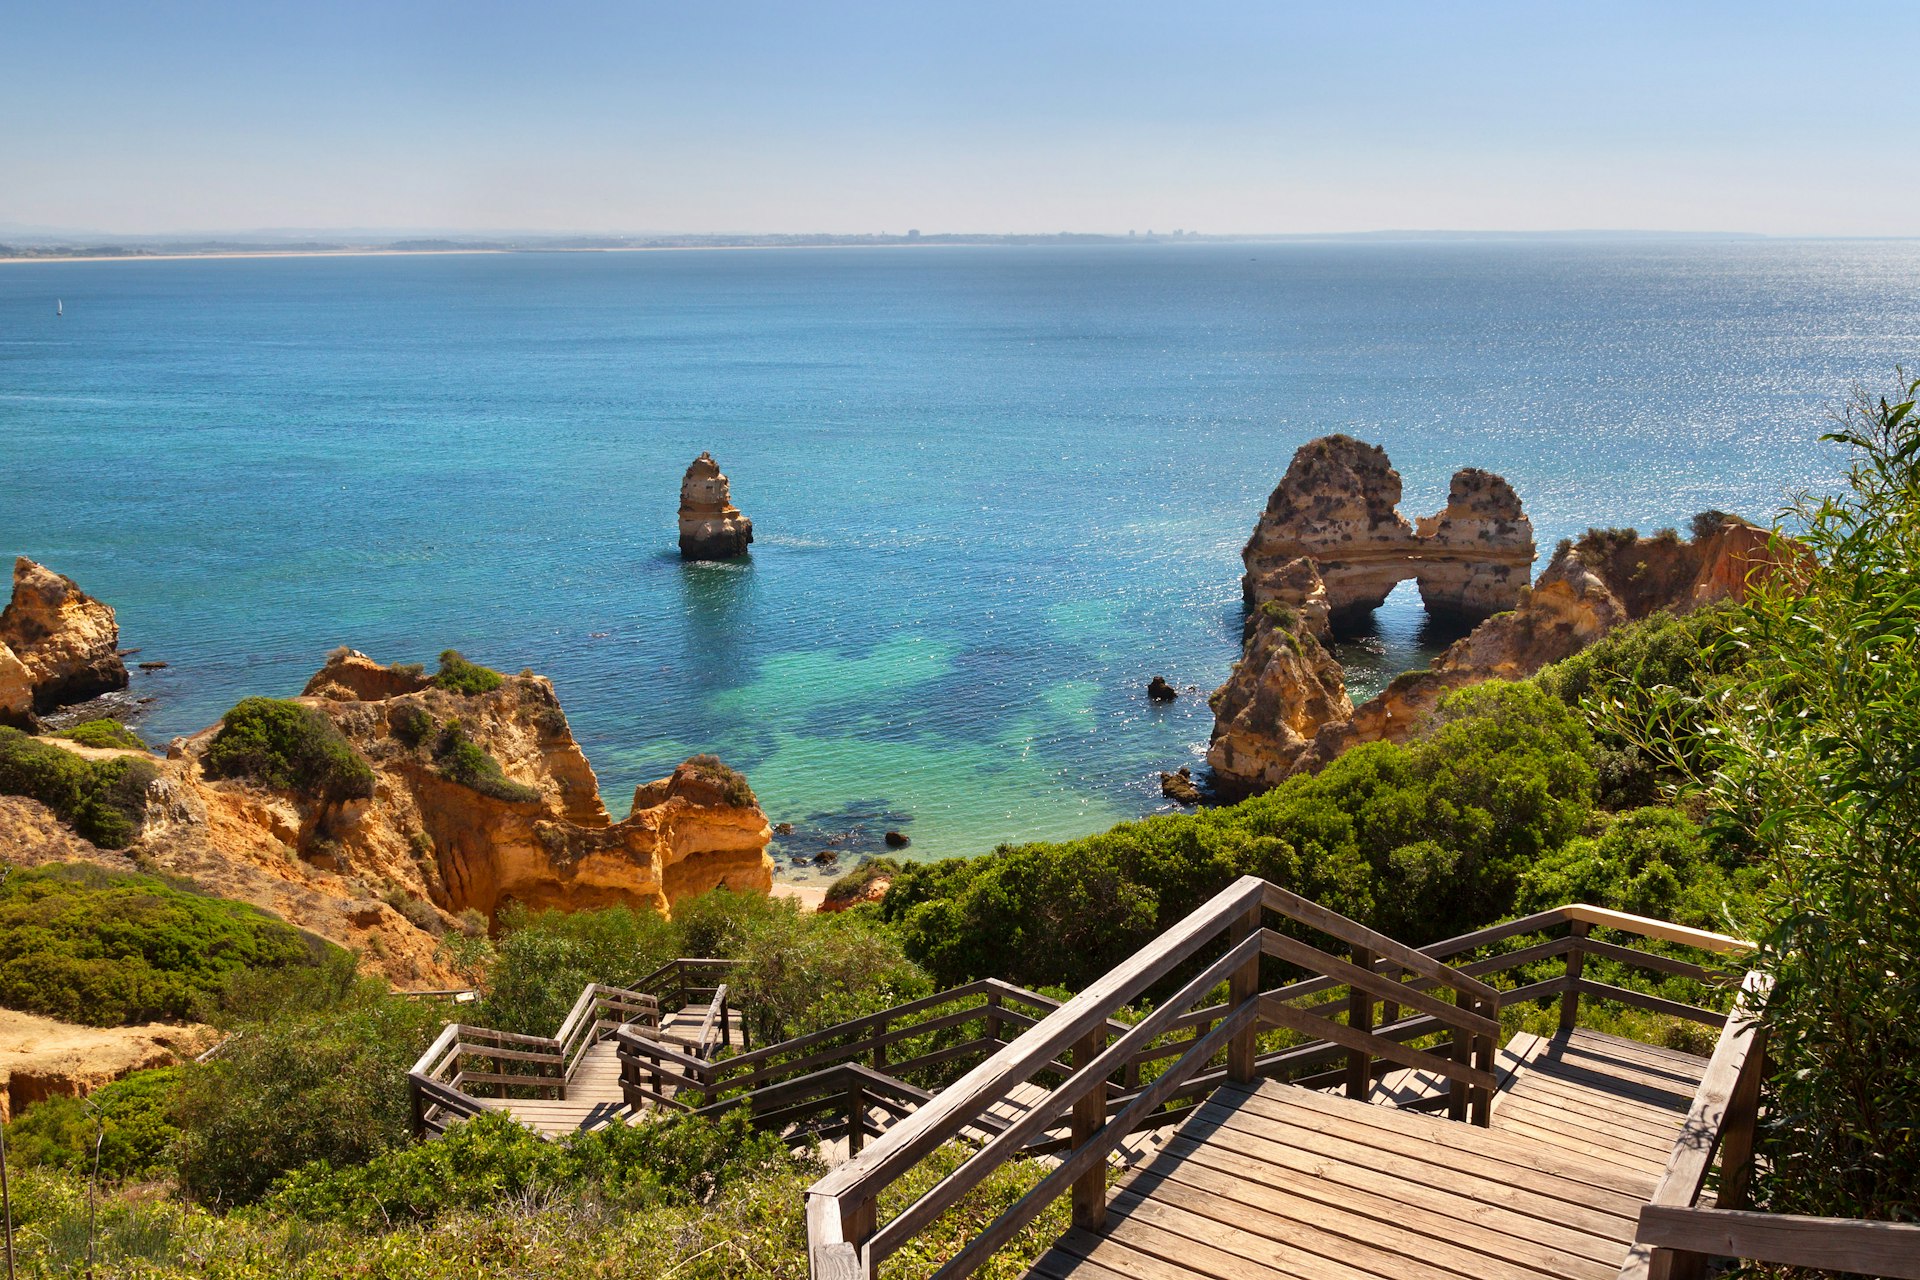 Wooden footbridge to beautiful beach with cliffs in Algarve, Portugal